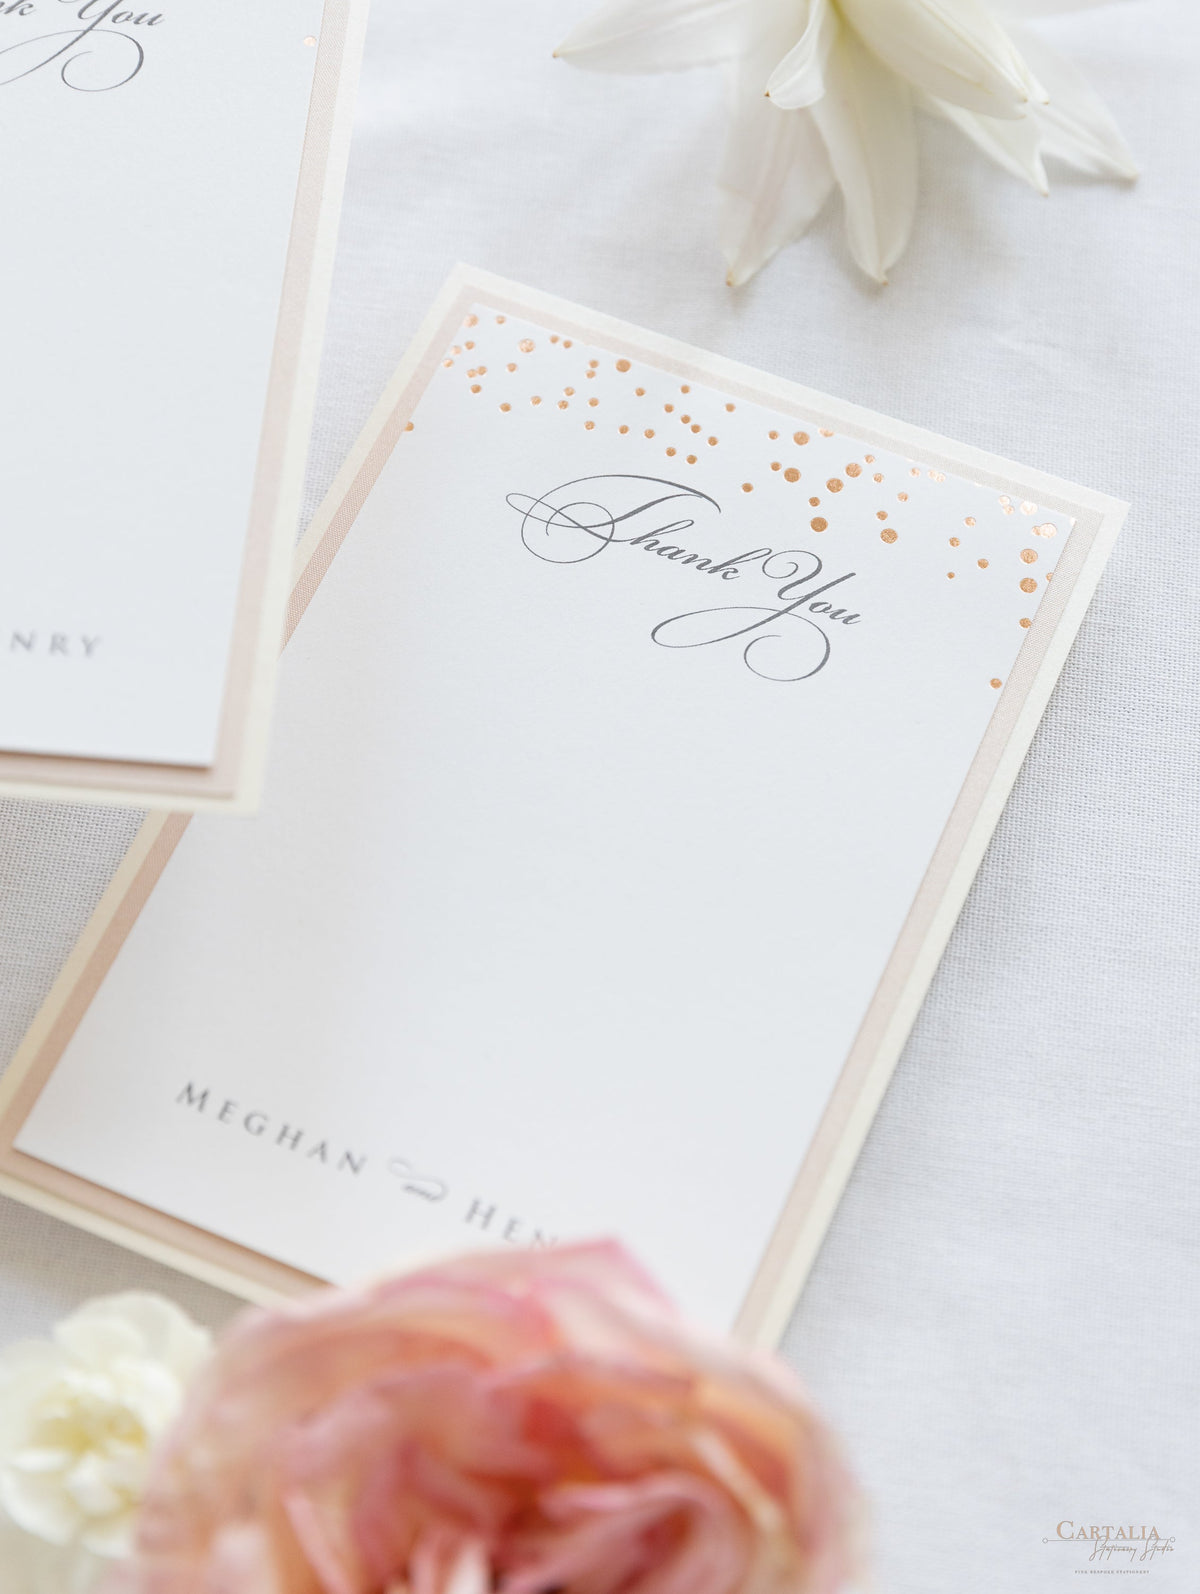 Thank you Card matching to Classic Envelope with Confetti  in Dusty Pink and Champagne